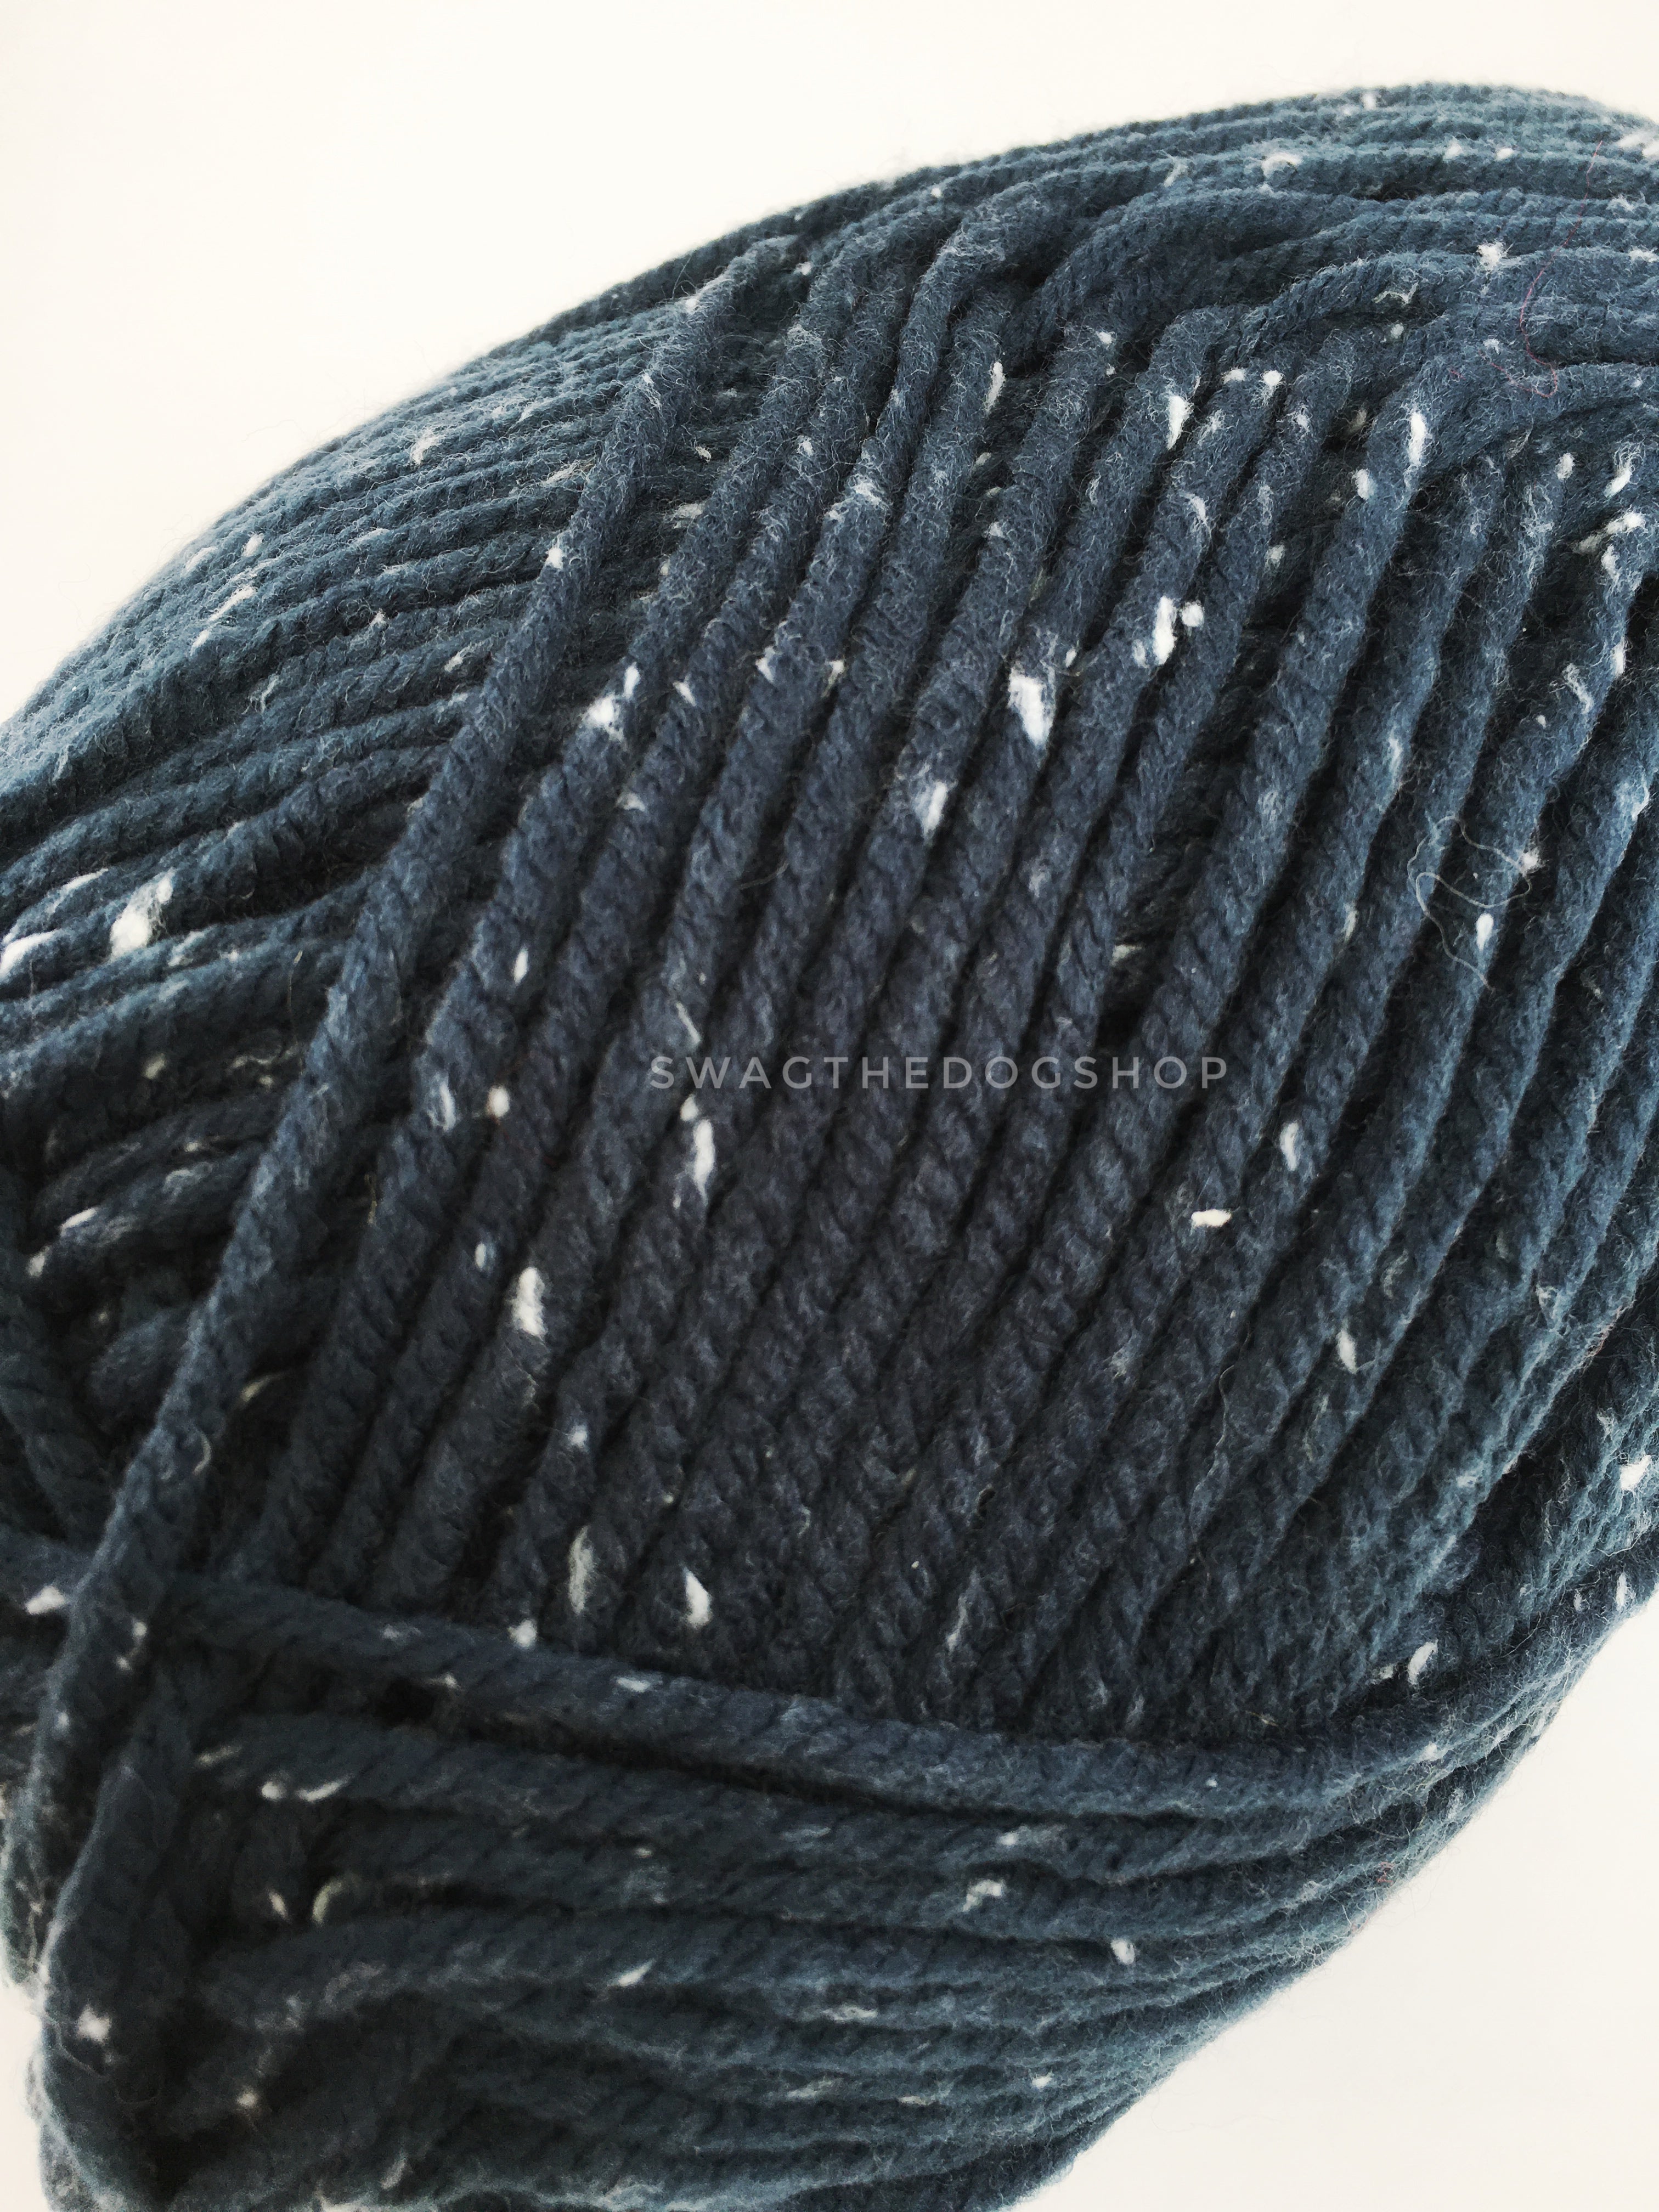 Denim Blue Tweed Swagsnood - Close Up View of Yarn. Dark Denim Color with White Speck Tweed Dog Snood with Accent Button